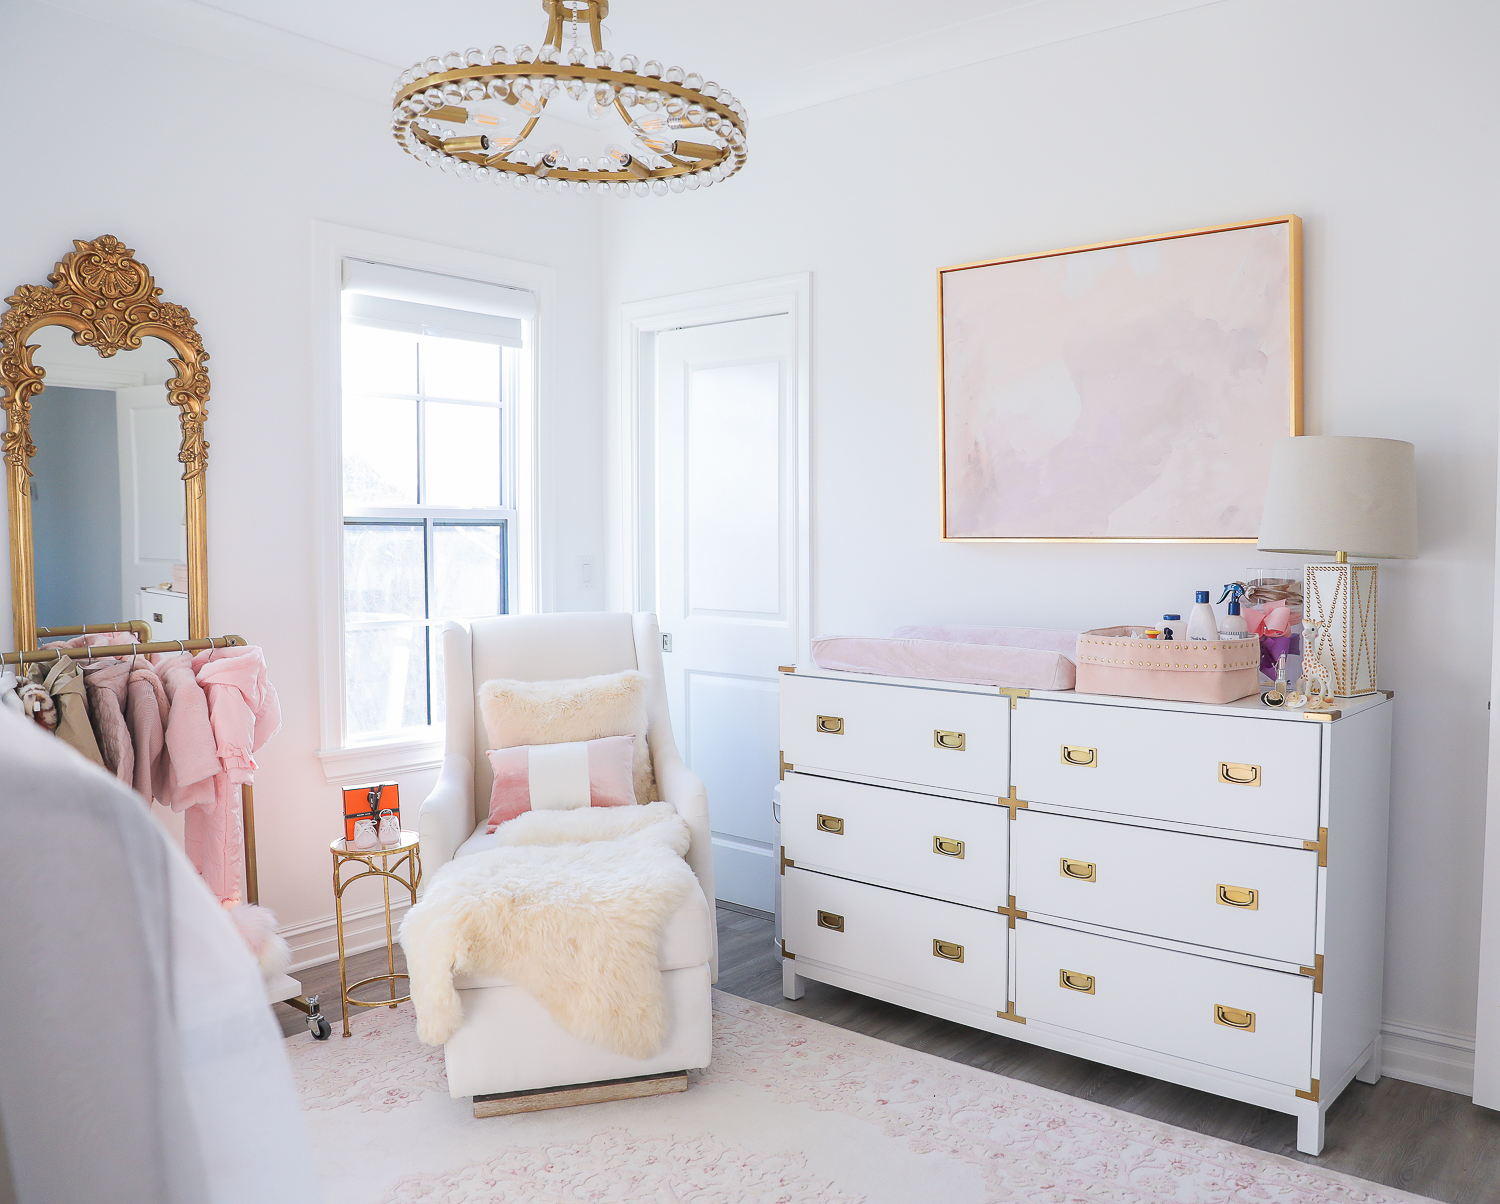 baby girl nursery inspiration christmas pinterest, baby girl nursery christmas tree, emily gemma, gold baby garment rack, the sweetest thing blog-2 |  Sophia’s Baby Girl Nursery at Christmastime by popular Oklahoma life and style blog, The Sweetest Thing: image of a girl nursery decorated with a Nordstrom Nolene Sequin Party Dress, Pottery Barn Kids Merced Glider & Ottoman, Wayfair Piper 2-in-1 Convertible Crib, RH Baby & Child NEW RUFFLE APPLIQUÉD ORGANIC VOILE NURSERY BEDDING COLLECTION, Wayfair Fontanne Oriental Pink/White Area Rug, Overstock Clover 8-light Aged Brass Chandelier, Horchow Sophia Rectangular Dressing Mirror, Etsy ShopAndisList Childrens standard rack, Pottery Barn Kids Raffia Heart Baskets, RH Baby & Child GILT DEMILUNE CANOPY BED CROWN, Walmart Holiday Time Pre-Lit Snow-Flocked Colorado Artificial Christmas Tree, 7', White Lights, Target Wondershop Glitter Deer Decorative Figurine Blush, T.J. Maxx pink velvet storage box, Wayfair Arnulfo 6 Drawer Double Dresser, Nordstrom Nursery Essential Gift Set, Nordstrom Sophie la Girafe Teething Toy, Glamboxes GLAMstand Hair Accessory Organizer, Serena & Lily Jenn Thatcher painting, Pottery Barn Kids Luxe Chamois Changing Pad, Crate & Kids Acrylic Shelf Bookcase, RH Baby and Child ANTIQUED GILT WOOD LETTER, Wayfair Luxe Solid Faux Fur Throw Pillow, Gap Toddler Cable-Knit Pom Beanie, Maisonette SteamLine Luggage *Exclusive* Vanity Case, Smocked Auctions NUTCRACKER SMOCKED BISHOP PINK GINGHAM, Nordstrom Ugg Jesse Bow Fluff Bootie, Overstock Safavieh Couture Carnation Round Tufted Ottoman, Pottery Barn Kids Blush Velvet Nursery Storage, and Nordstrom Chenille Blanket.